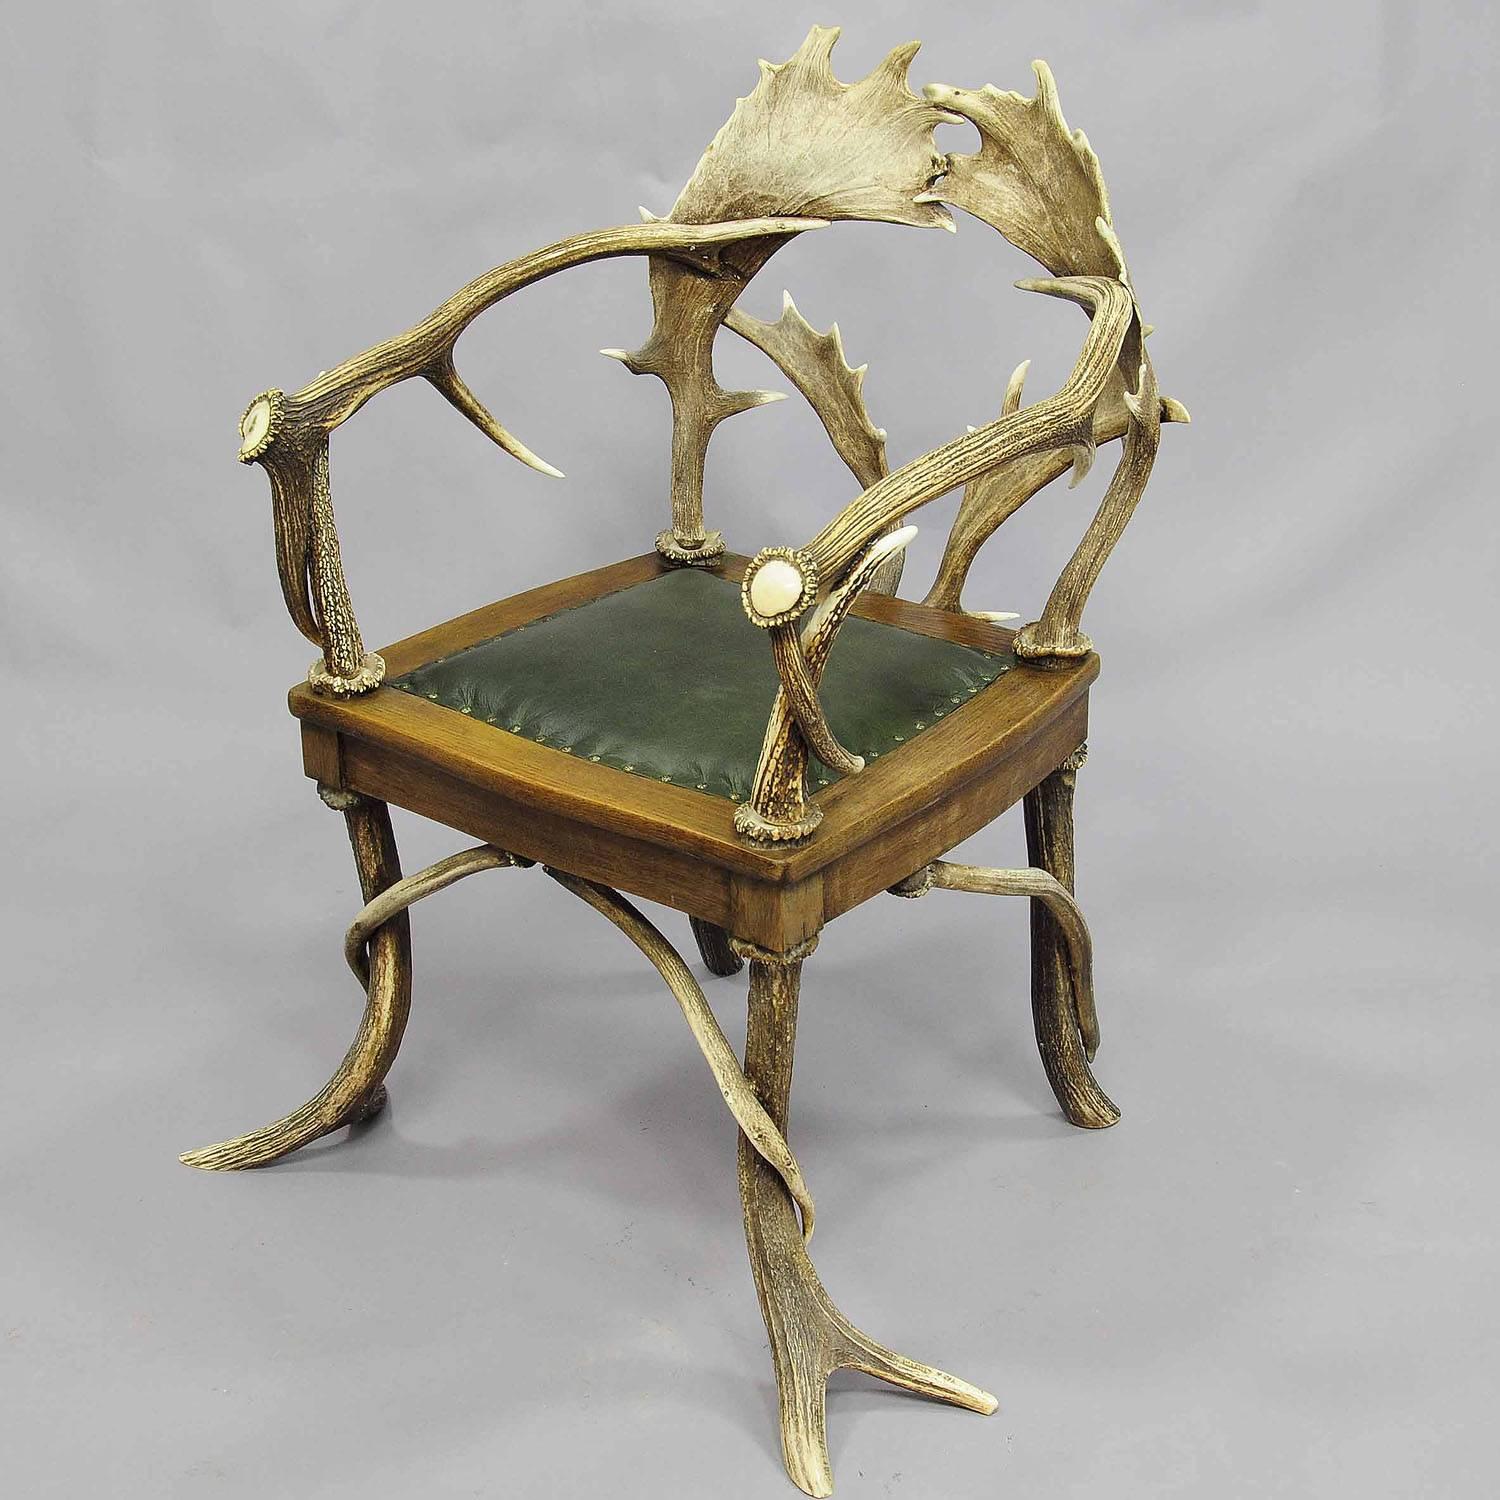 An antique black forest antler armchair, made of horns from the deer and fallow deer. green leather seat (replaced). Executed, circa 1900.